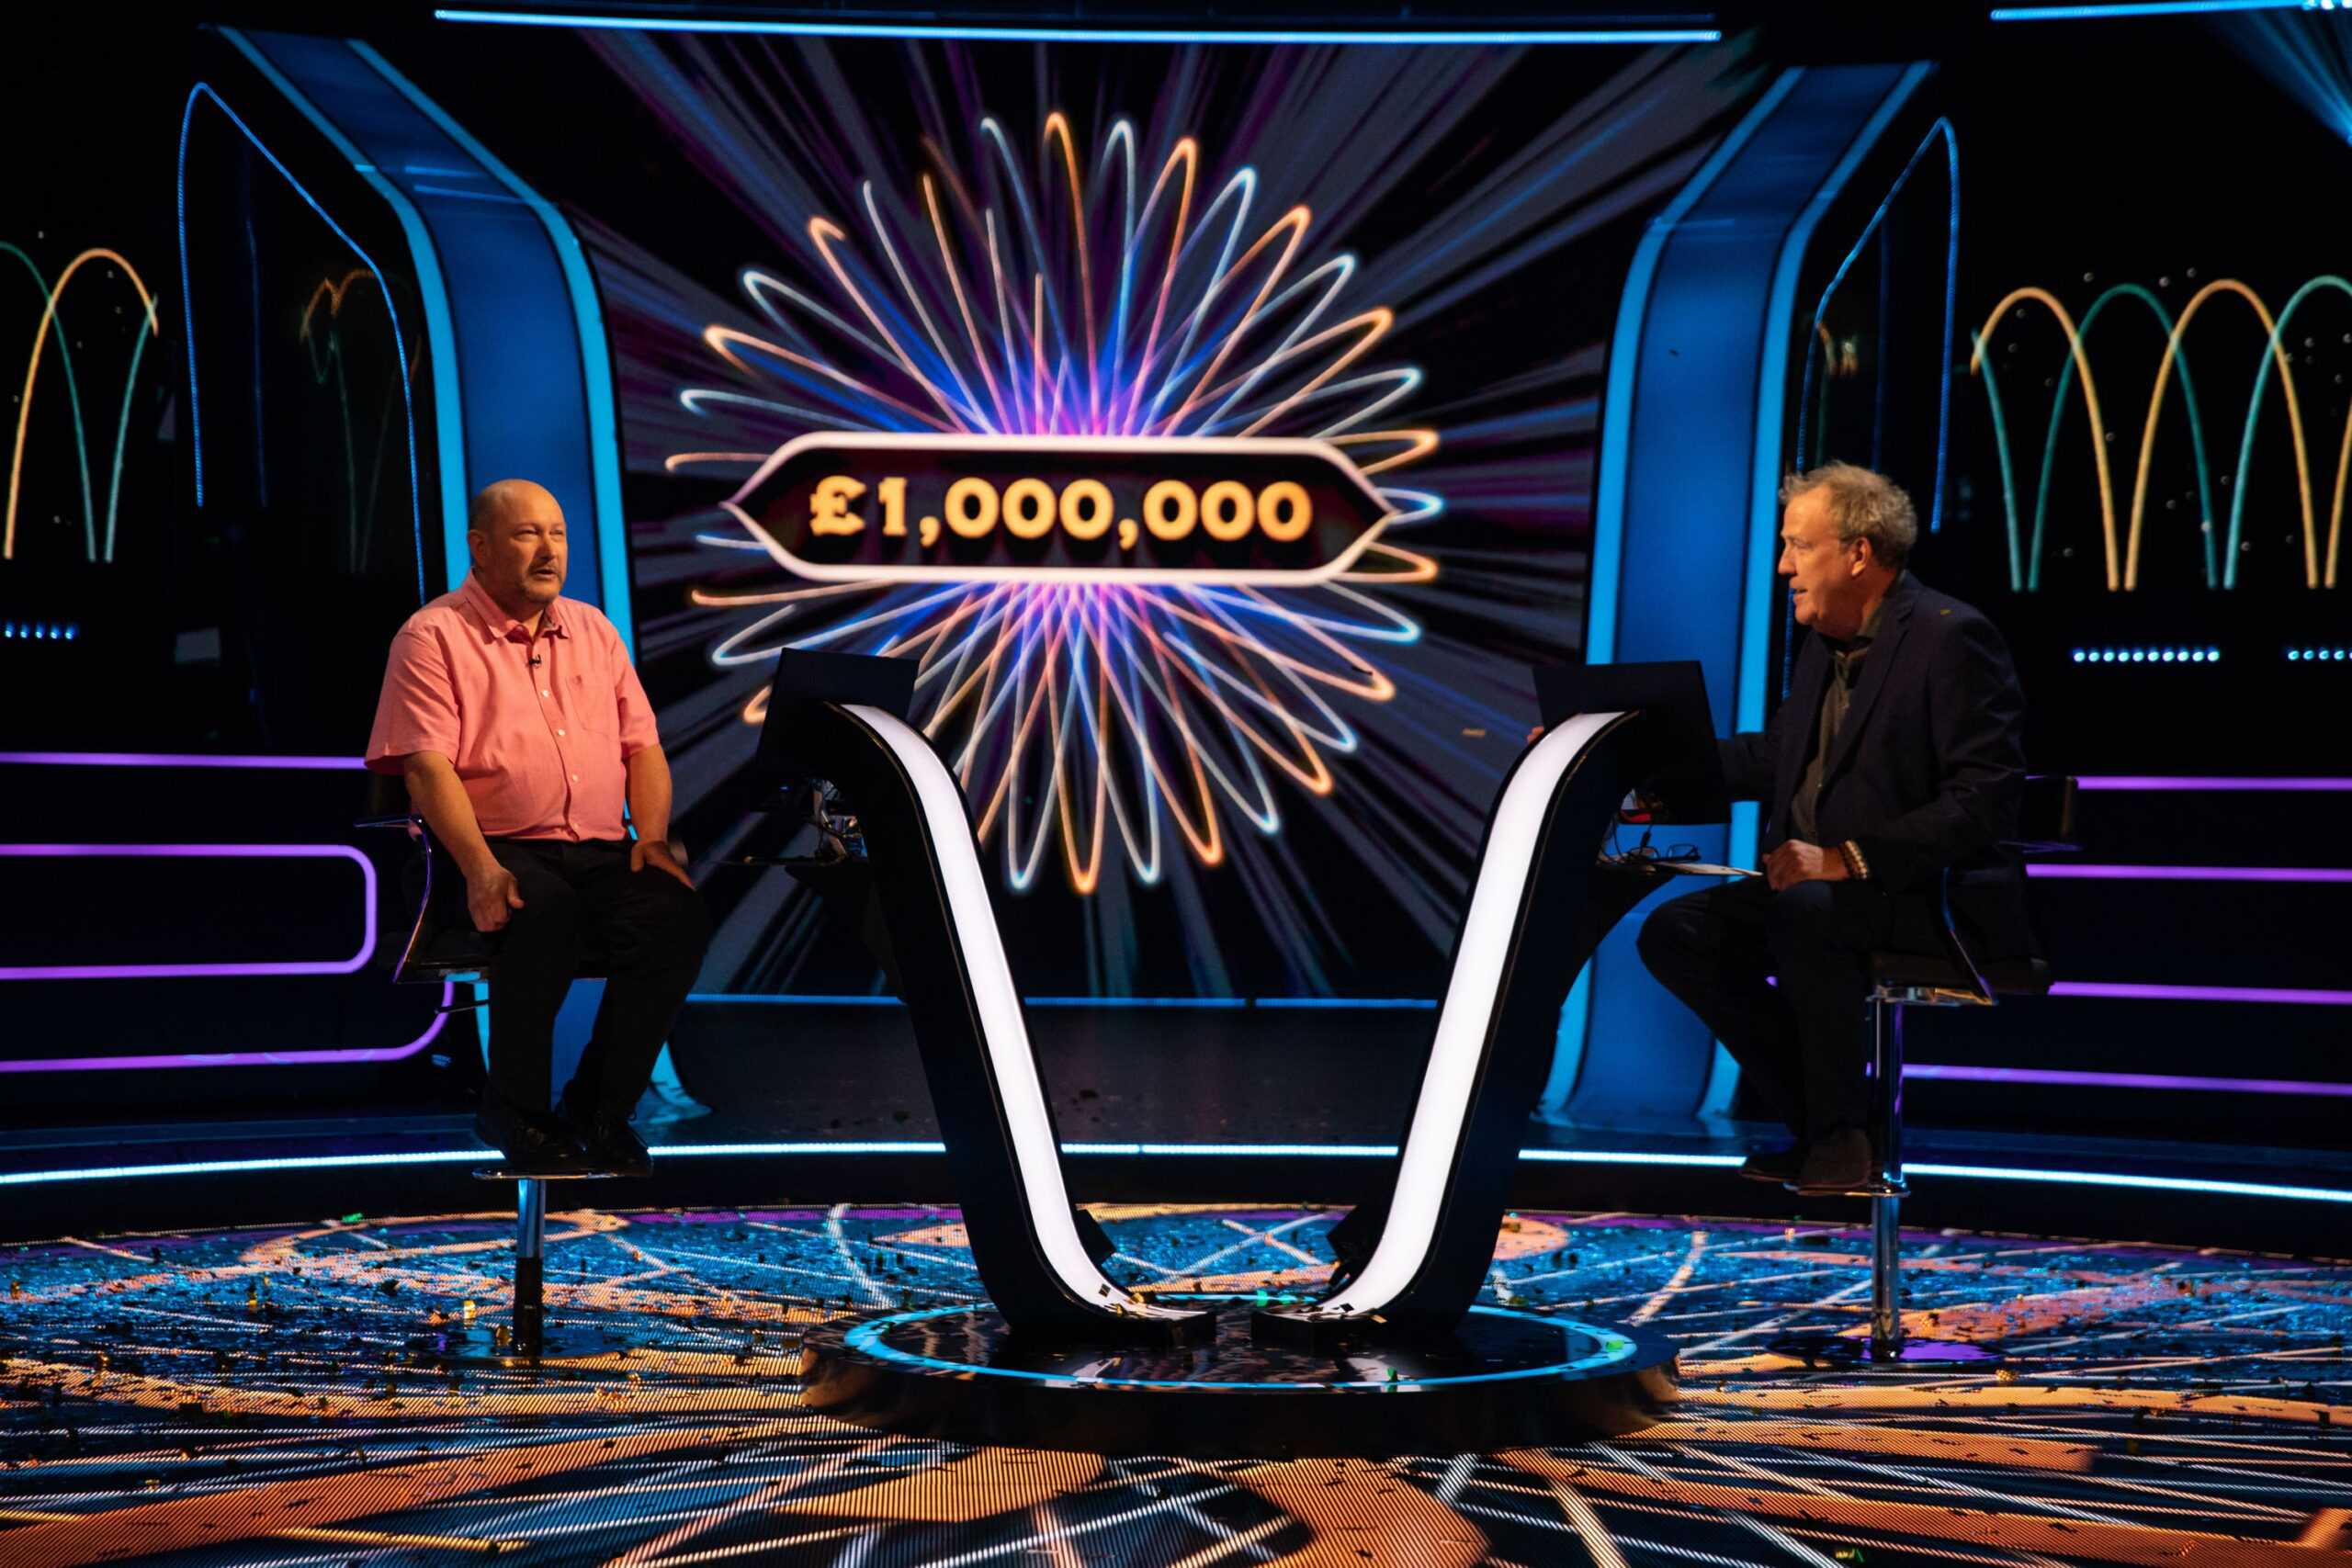 Speculation mounts that Jeremy Clarkson could have been axed as host of Who Wants To Be A Millionaire